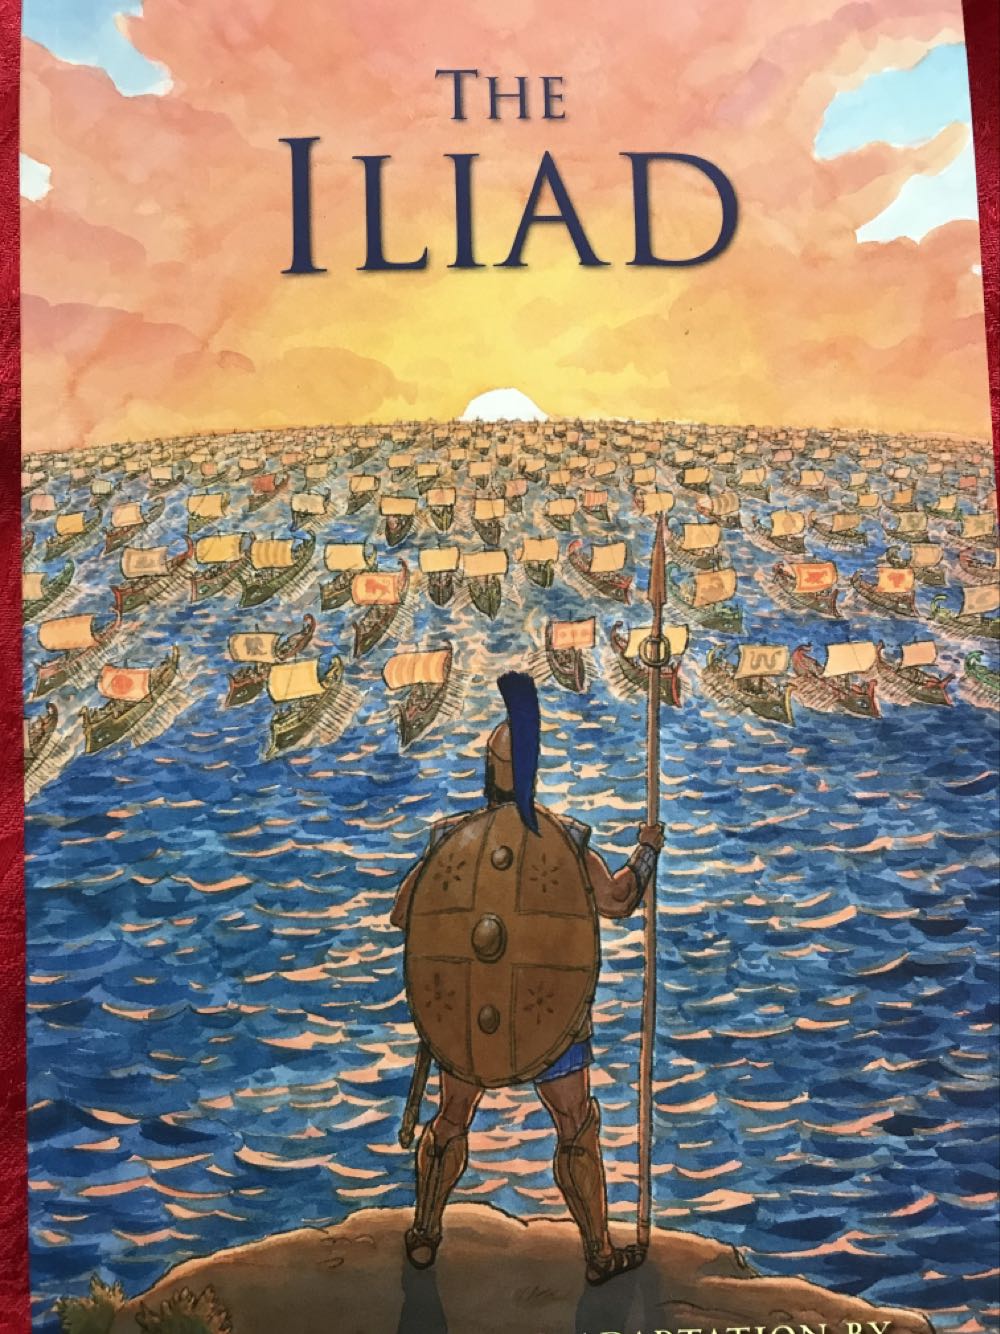 Iliad, The - Gareth Hinds (Candlewick Press - Paperback) book collectible [Barcode 9780763696634] - Main Image 1